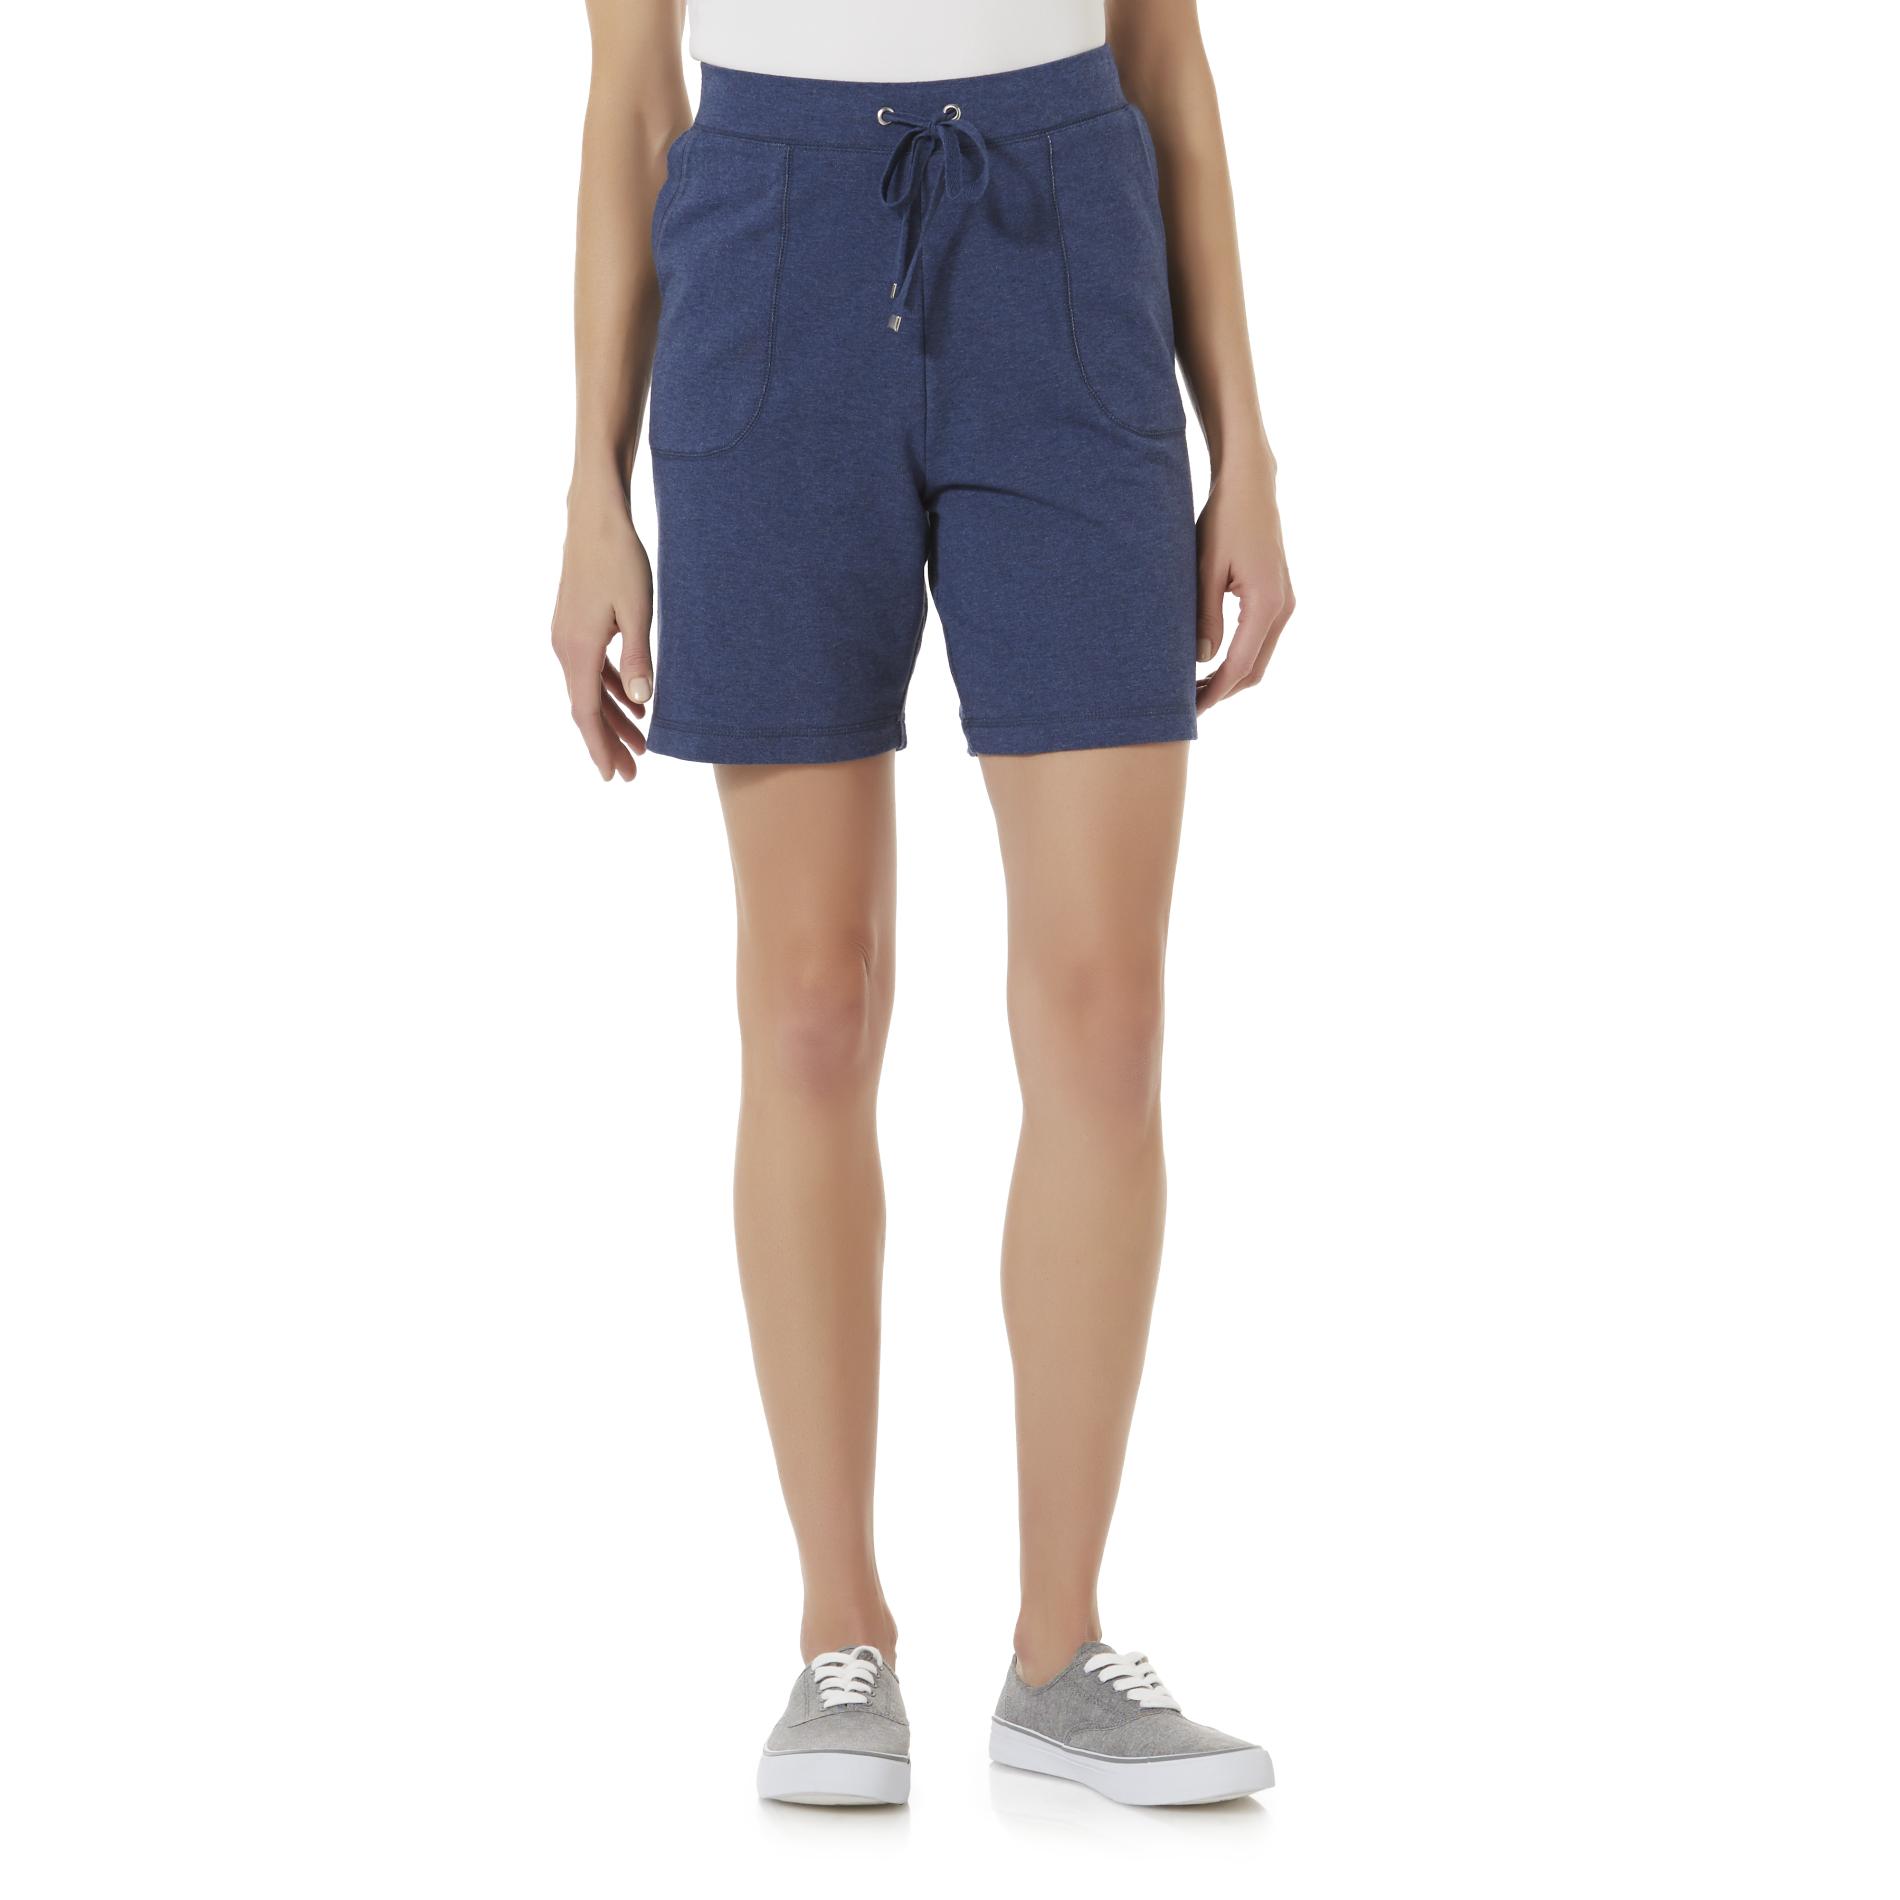 Women's French Terry Knit Shorts